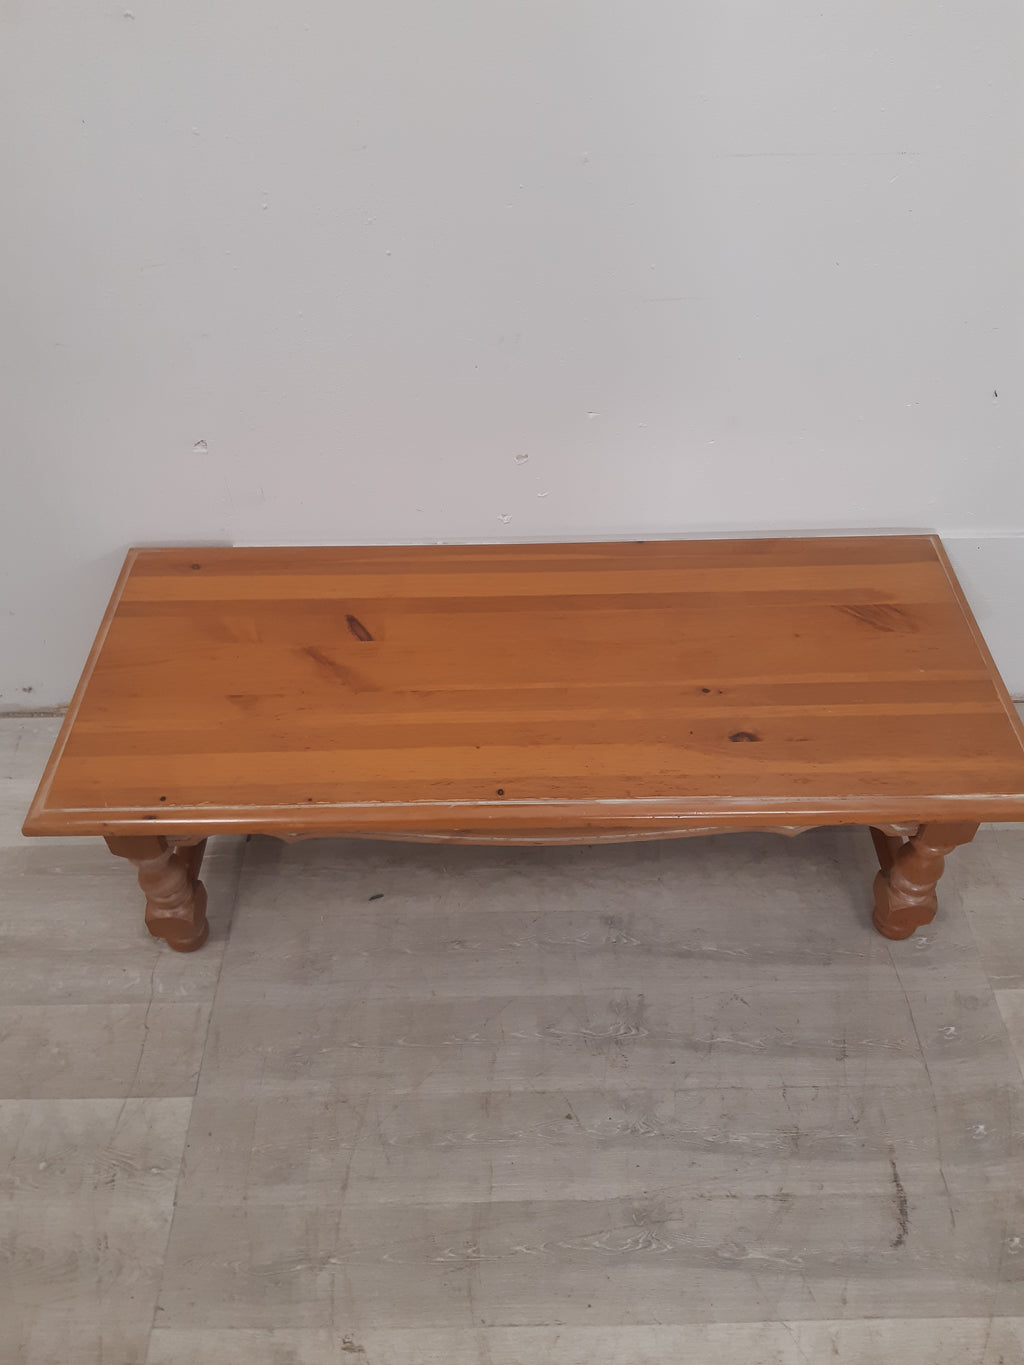 53" Solid Wood Coffee Table